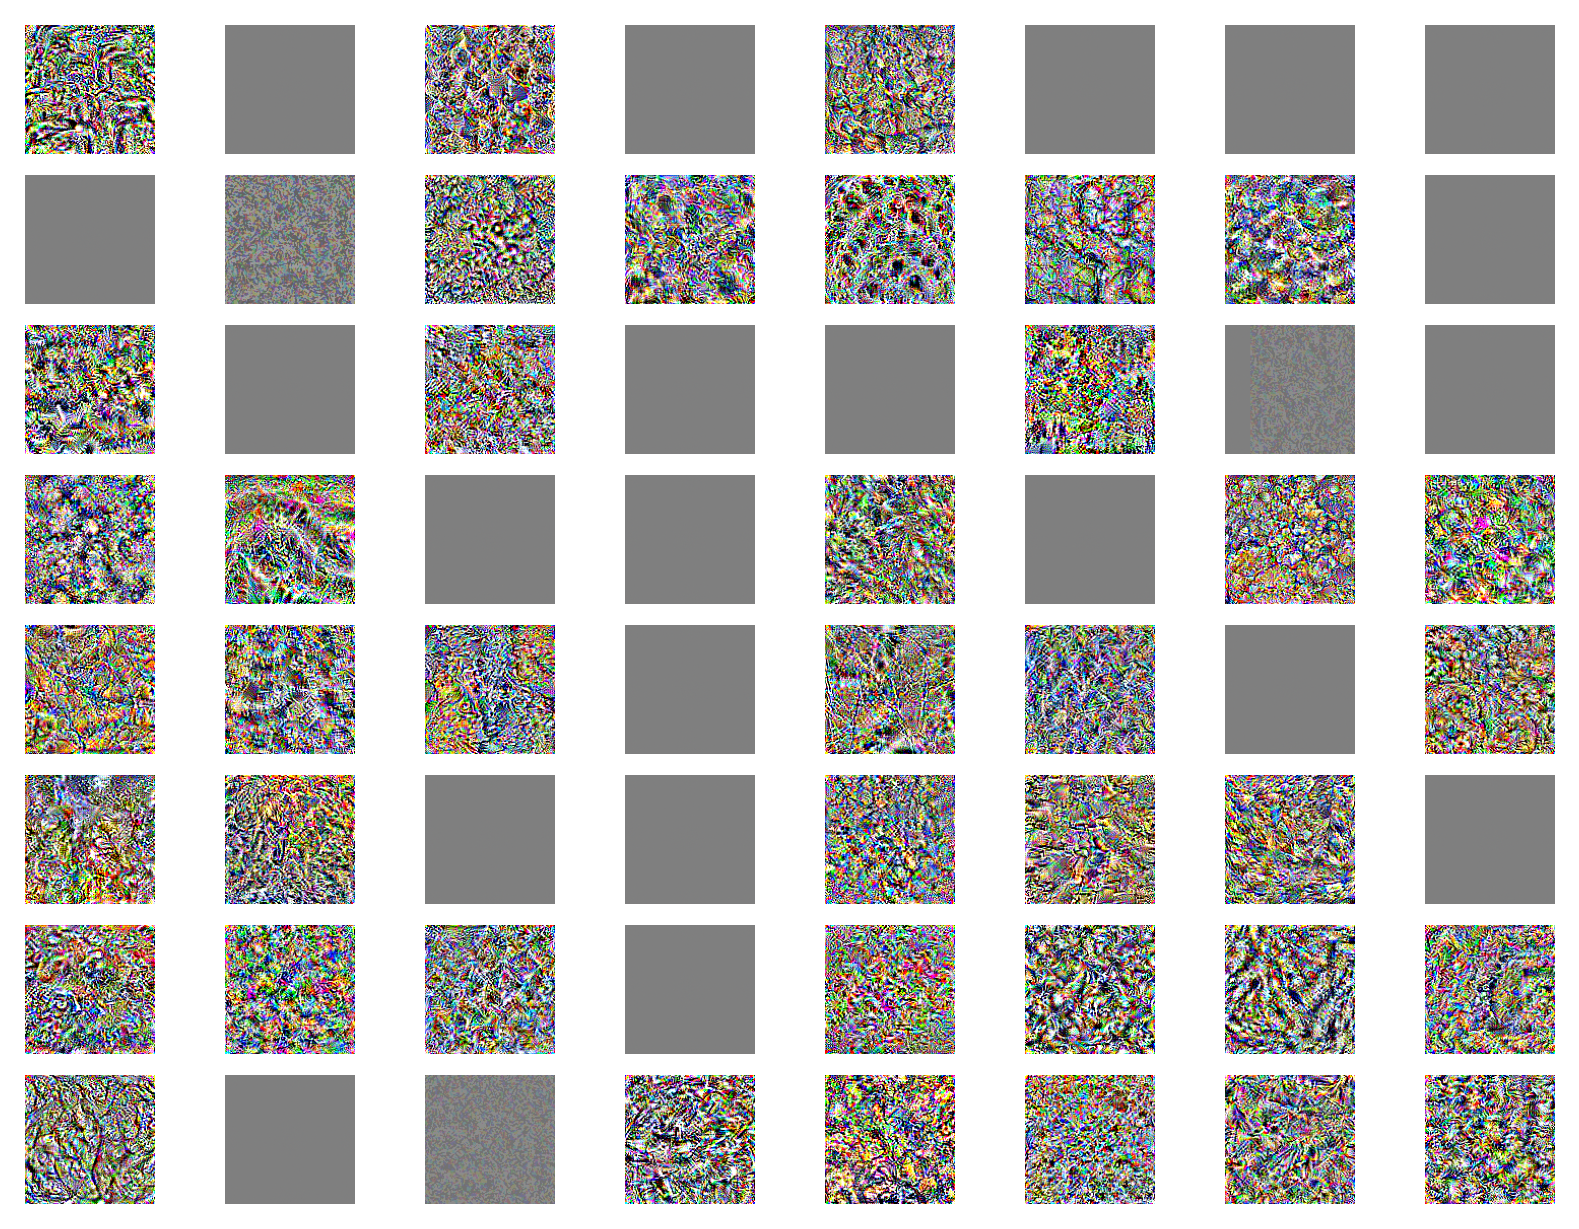 A lot of bright colourful images of varying patterns. I really can't explain these.